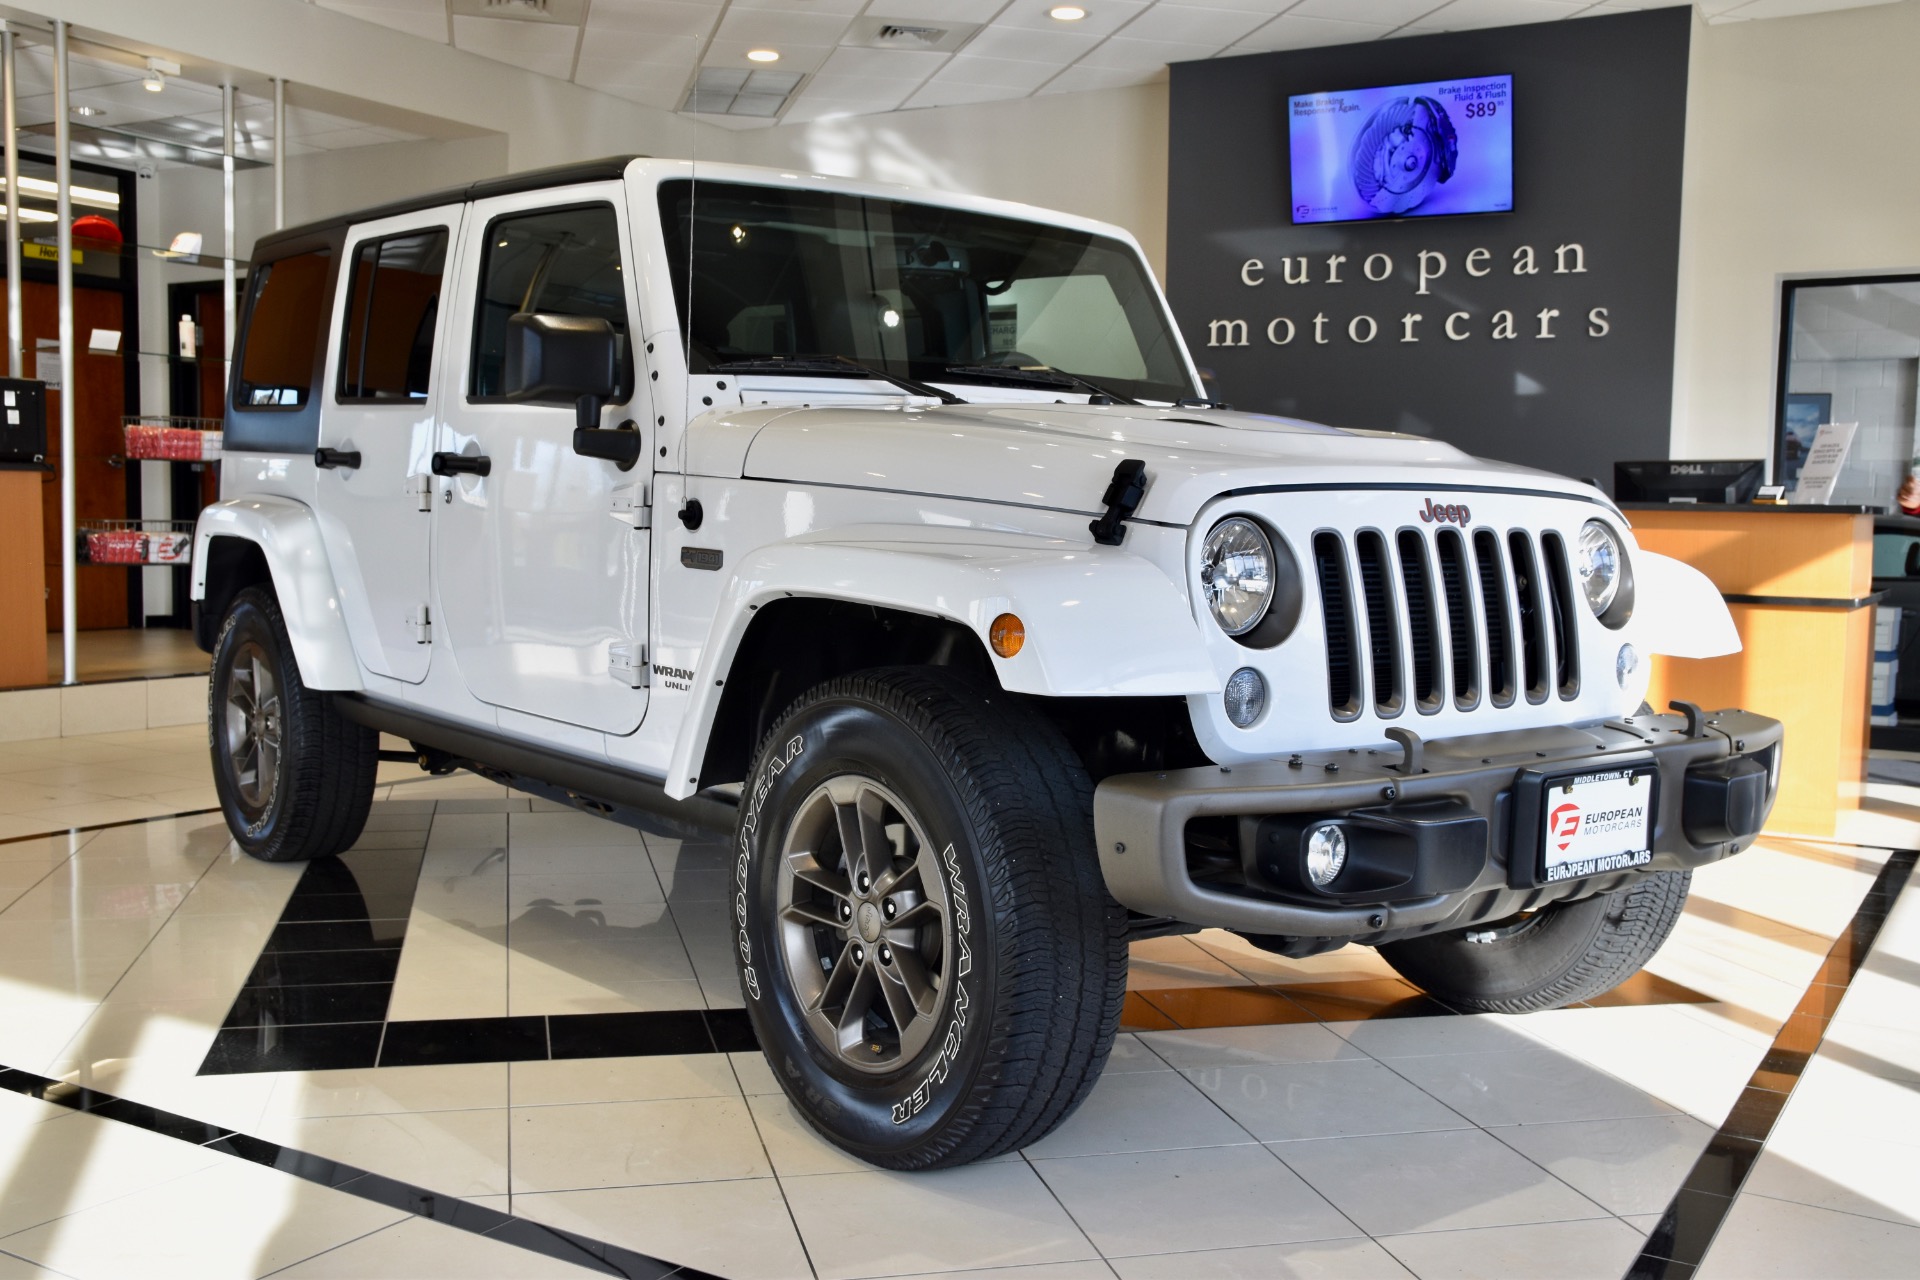 Used 2016 Jeep Wrangler Unlimited Sahara 75th Anniversary For Sale (Sold) |  European Motorcars Stock #276446